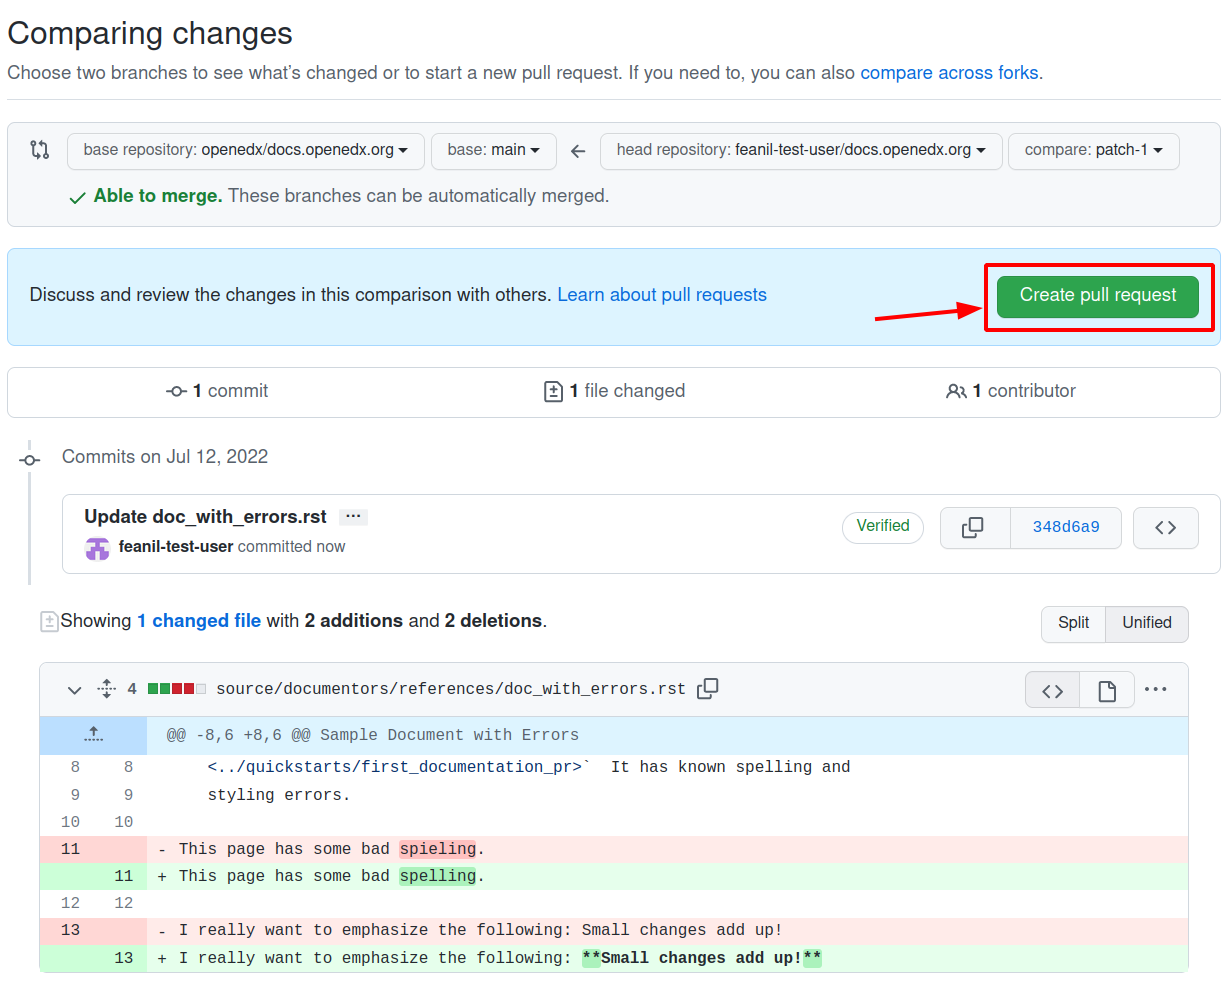 A screenshot of the github page comparing changes with the "Create pull request" button highlighted.